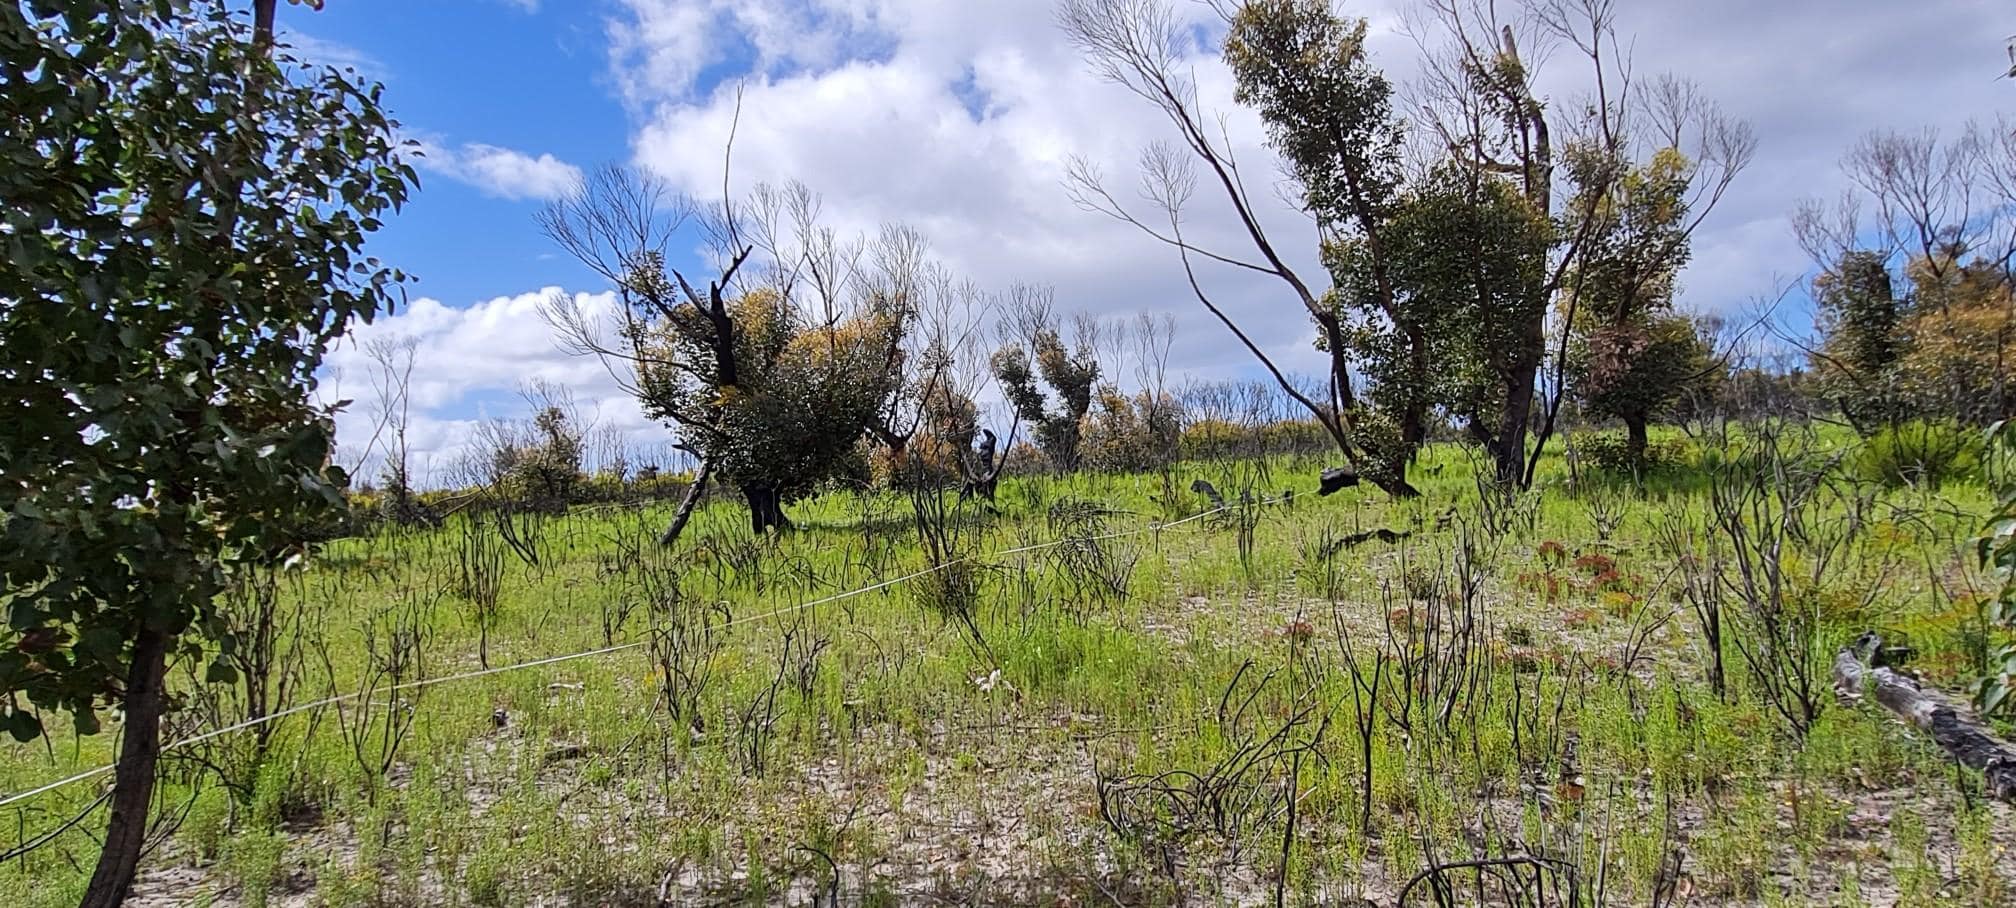 Photo of the Australian bush | Featured Image for Monitoring the Impacts of Bushfires on Soils page by TERN.